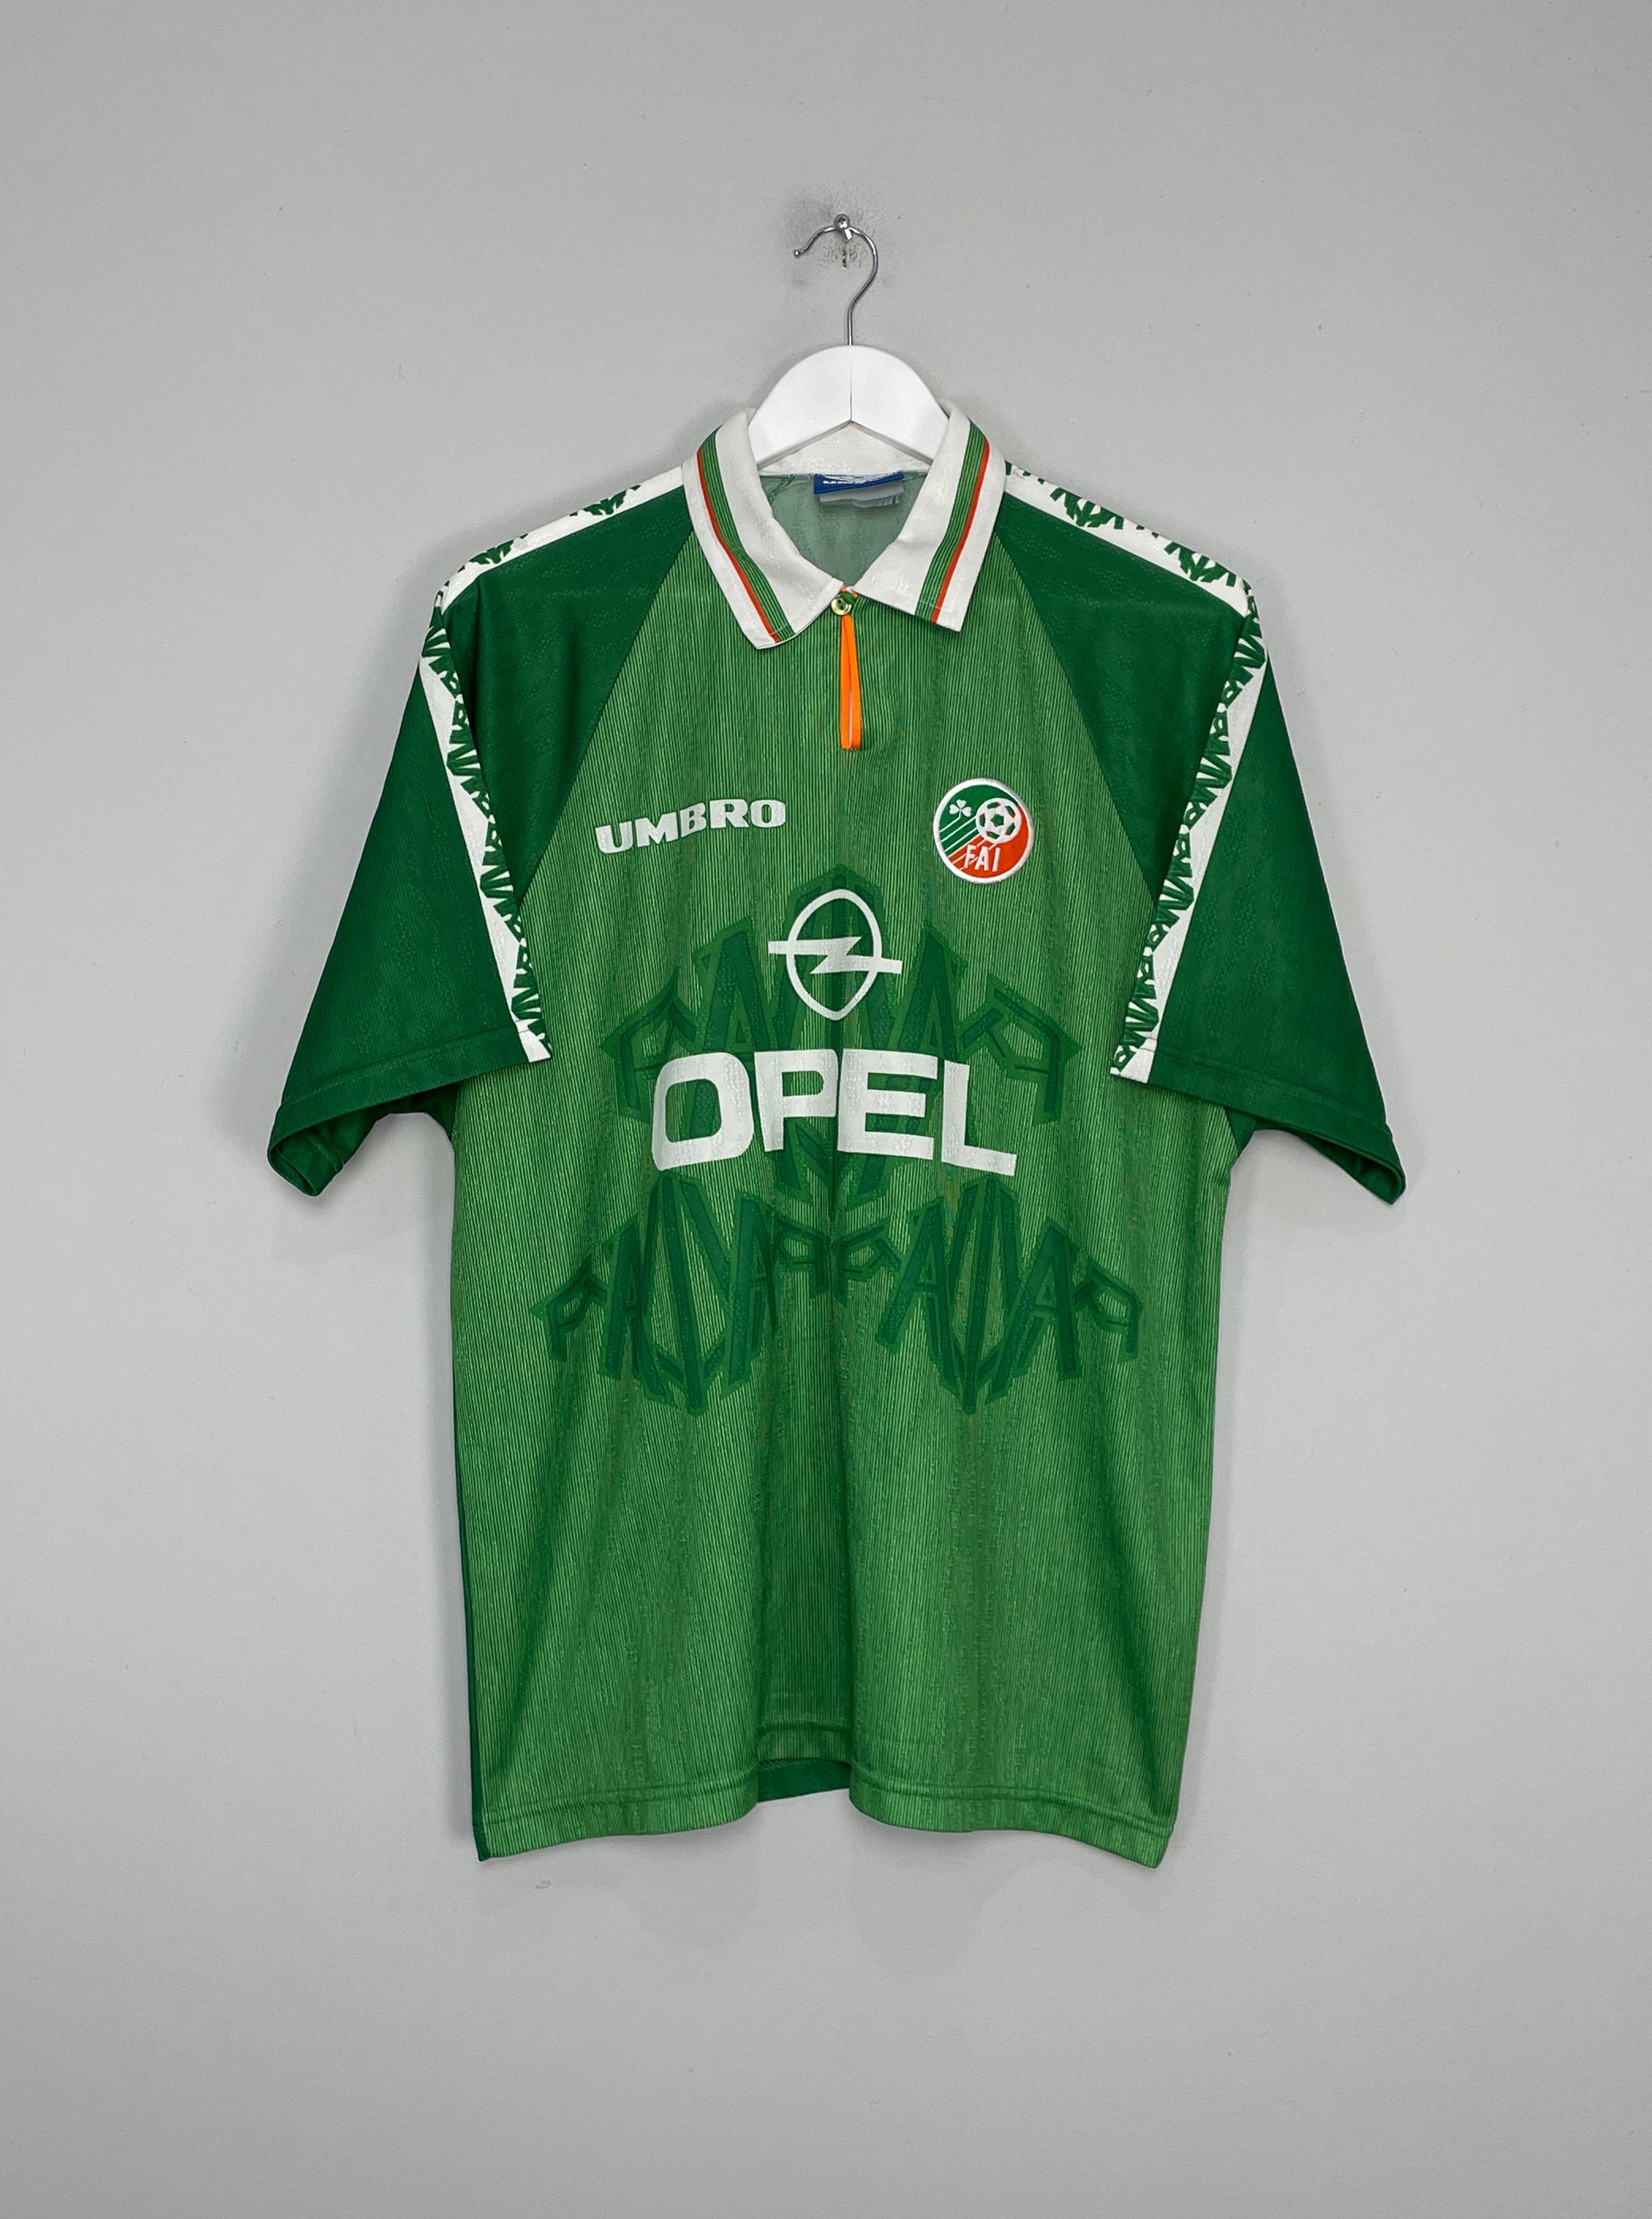 Image of the Ireland shirt from the 1996/97 season